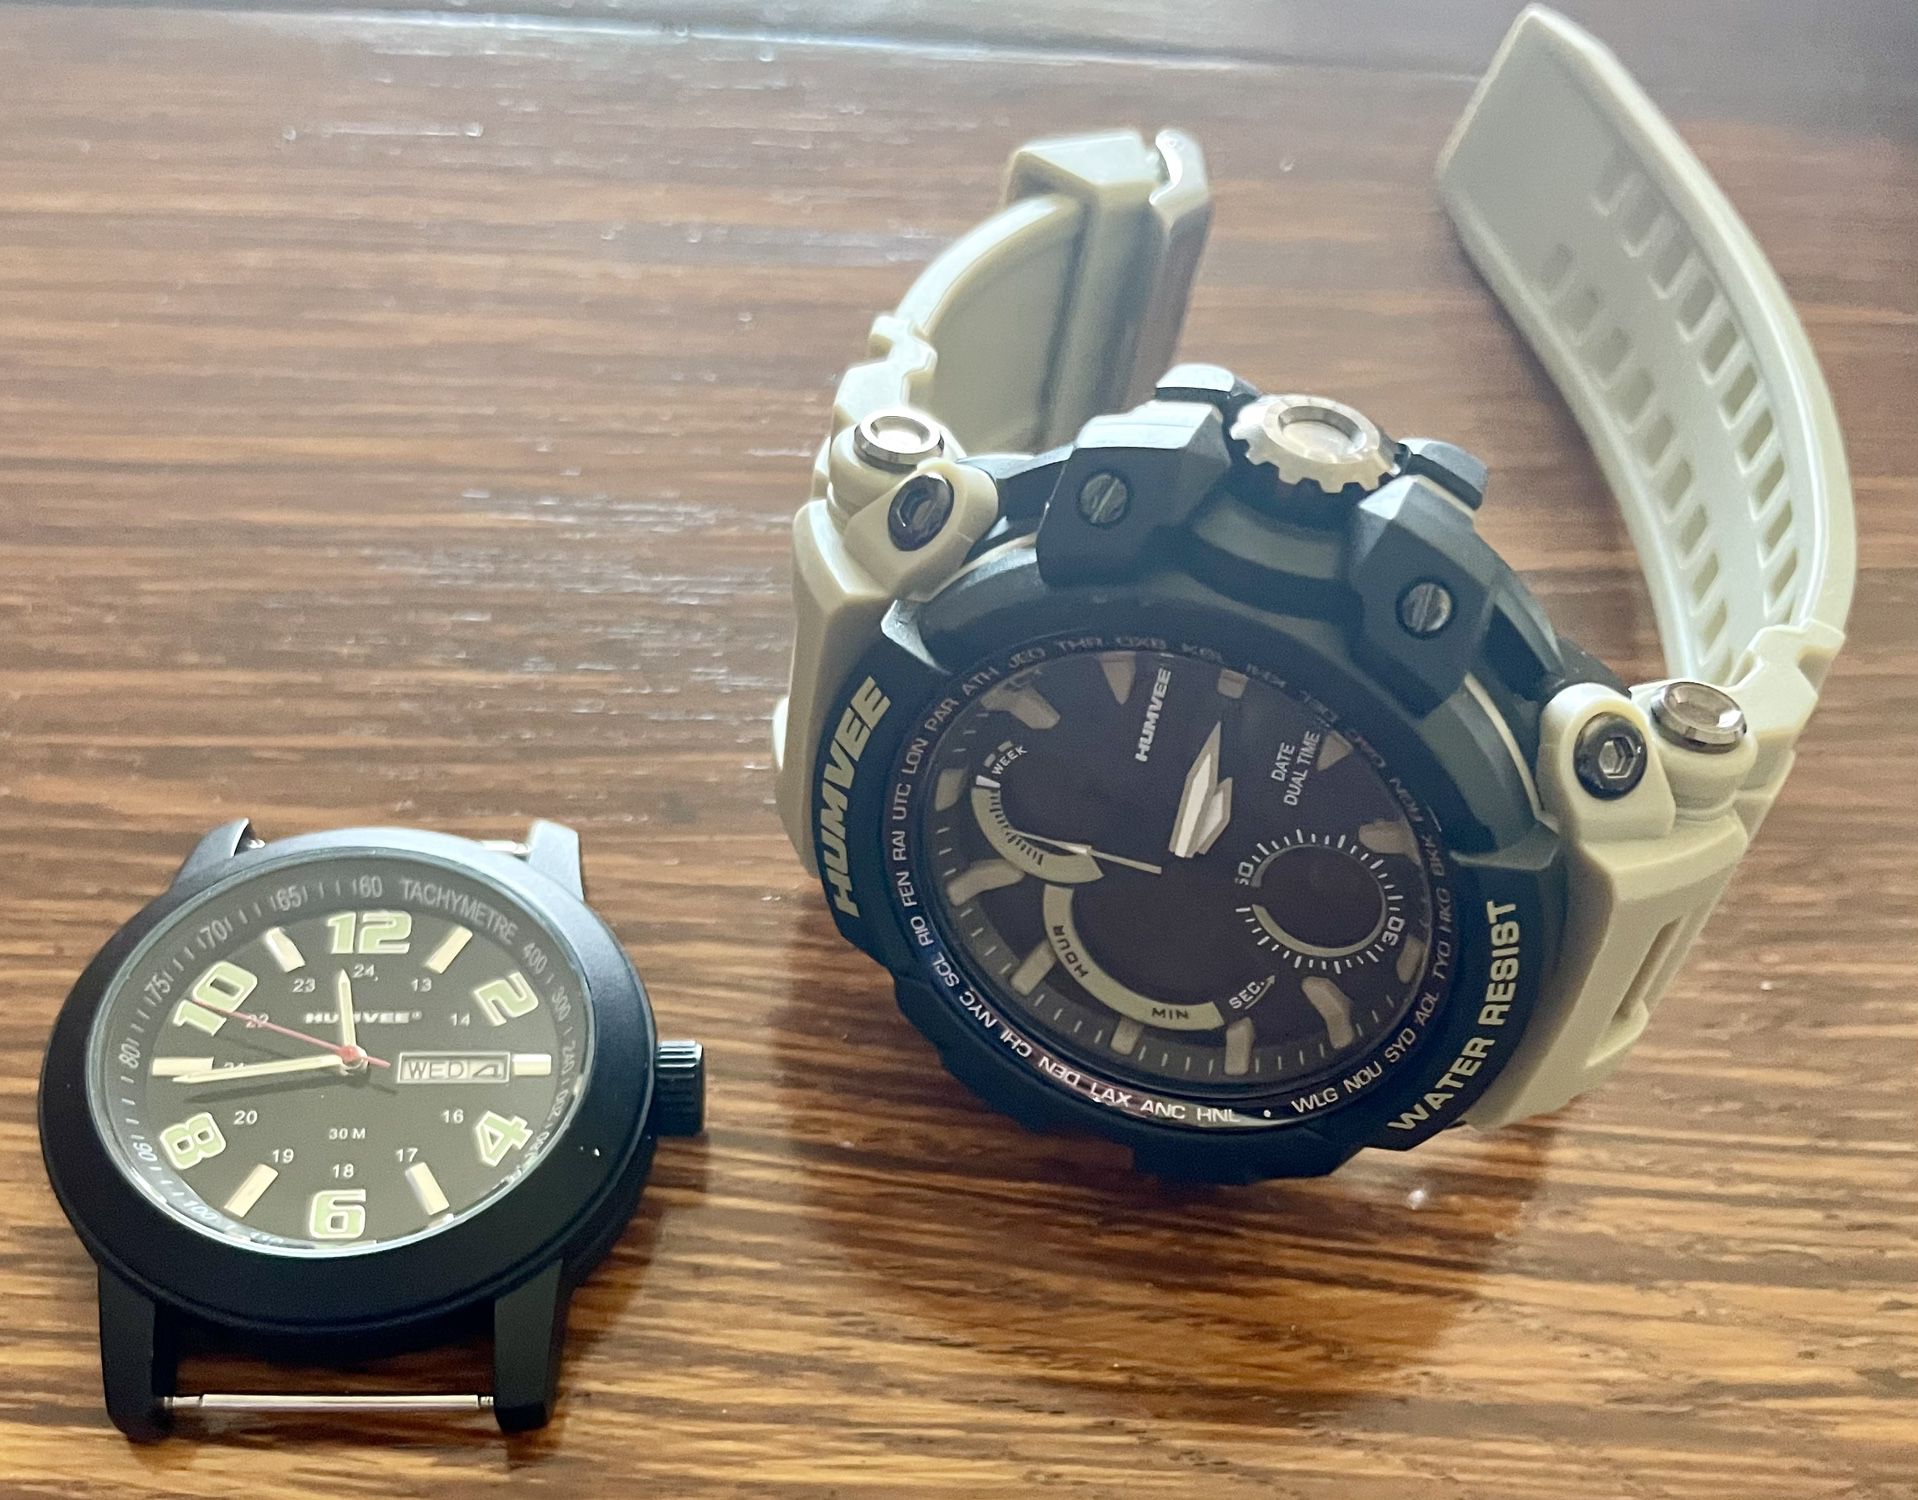 Humvee Watches 2 For $12